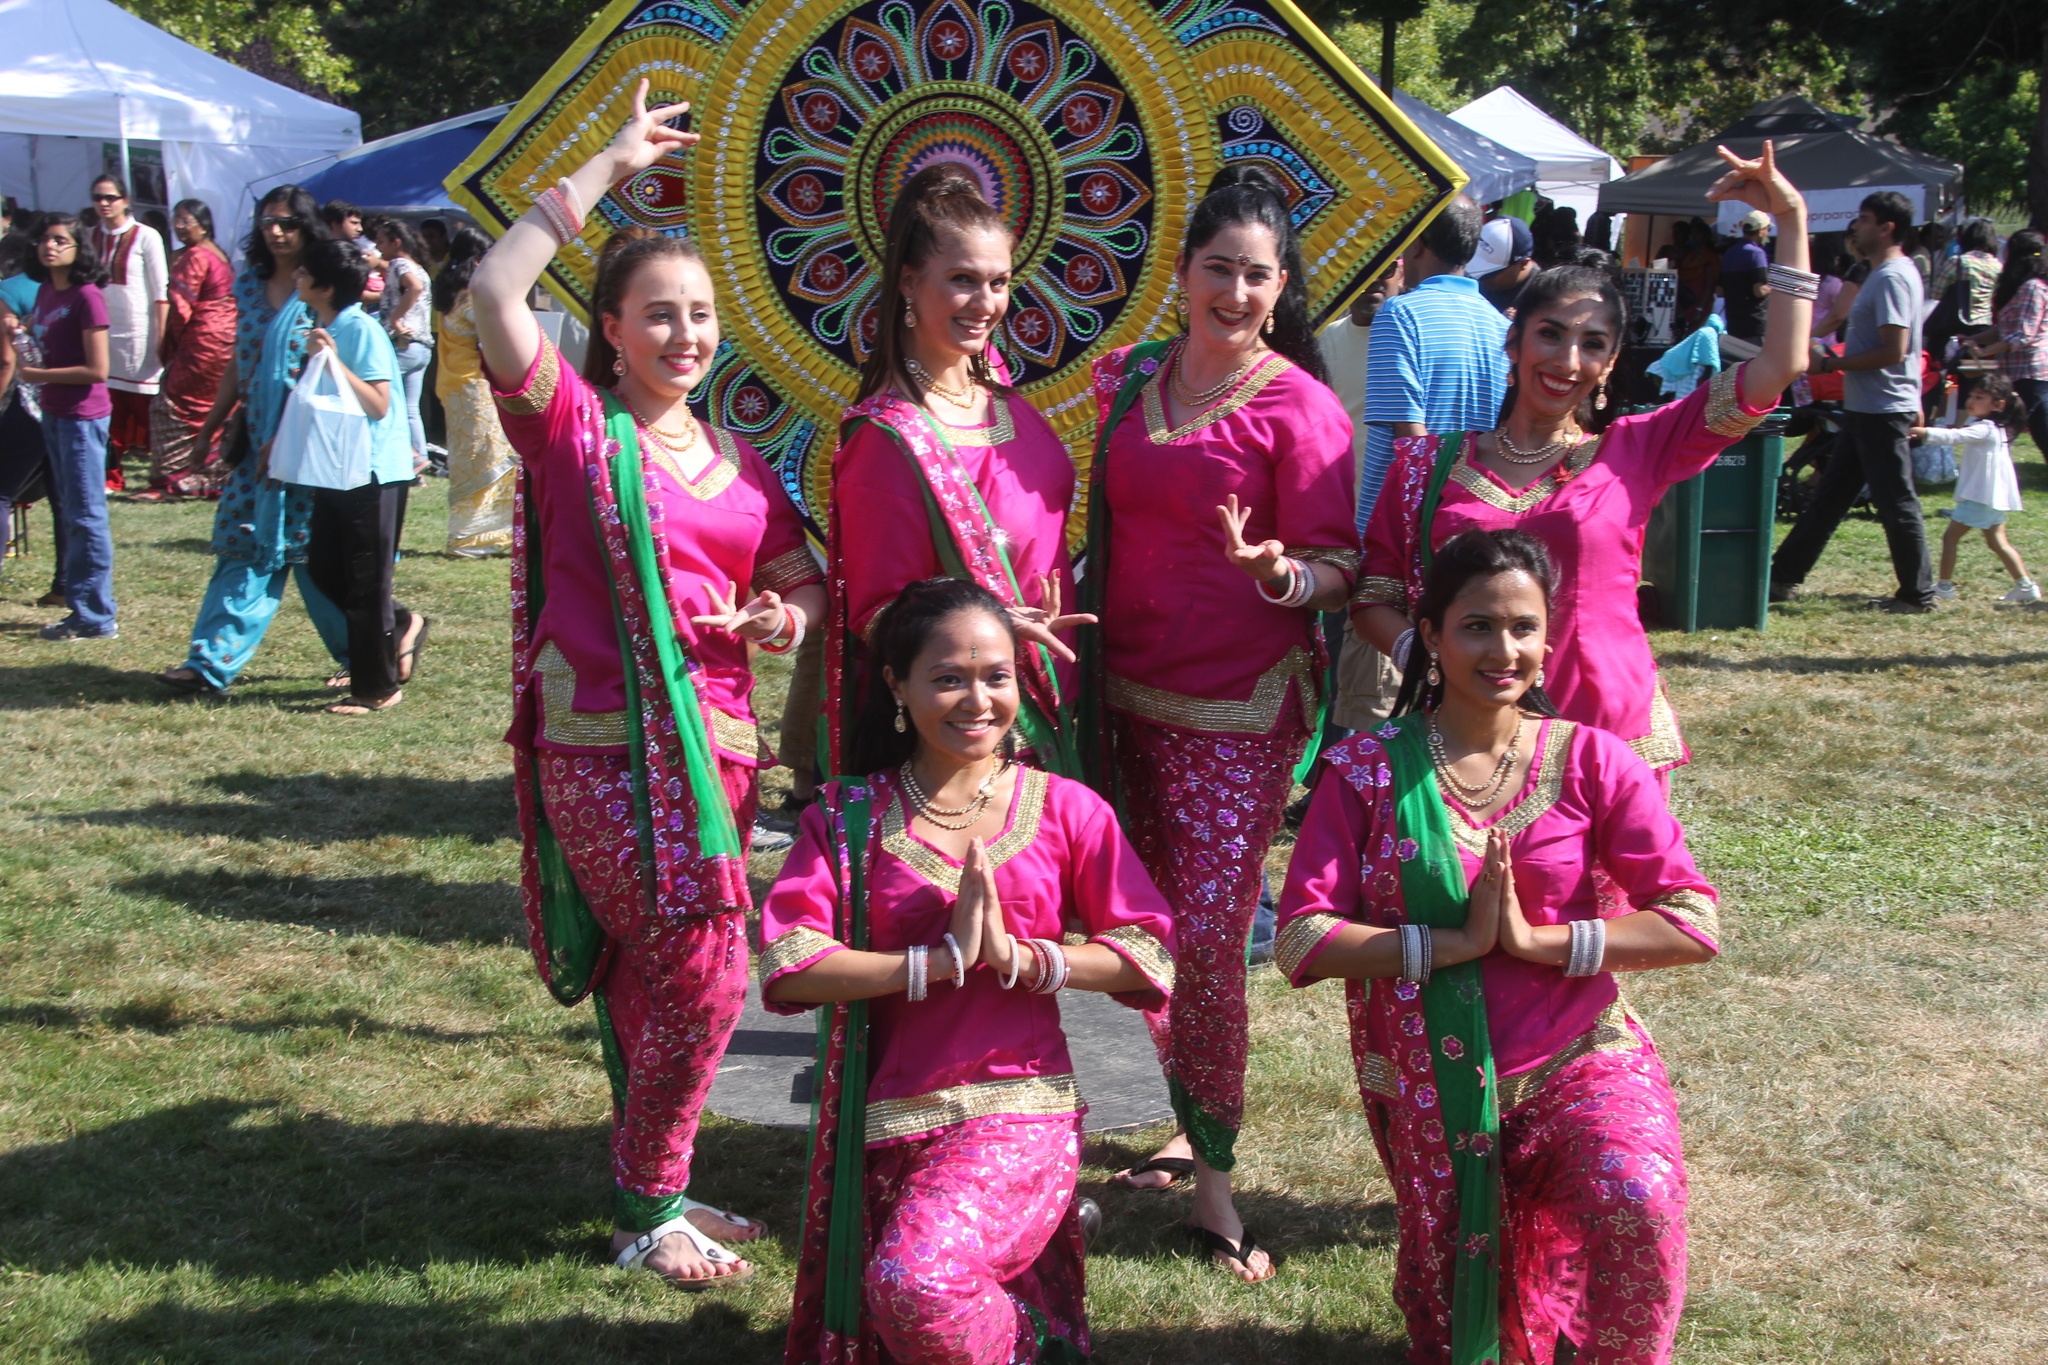 Thousands of people attended the two-day Ananda Mela event last Saturday and Sunday at Redmond City Hall. The Vedic Cultural Center-presented Joyful Festival of India featured music